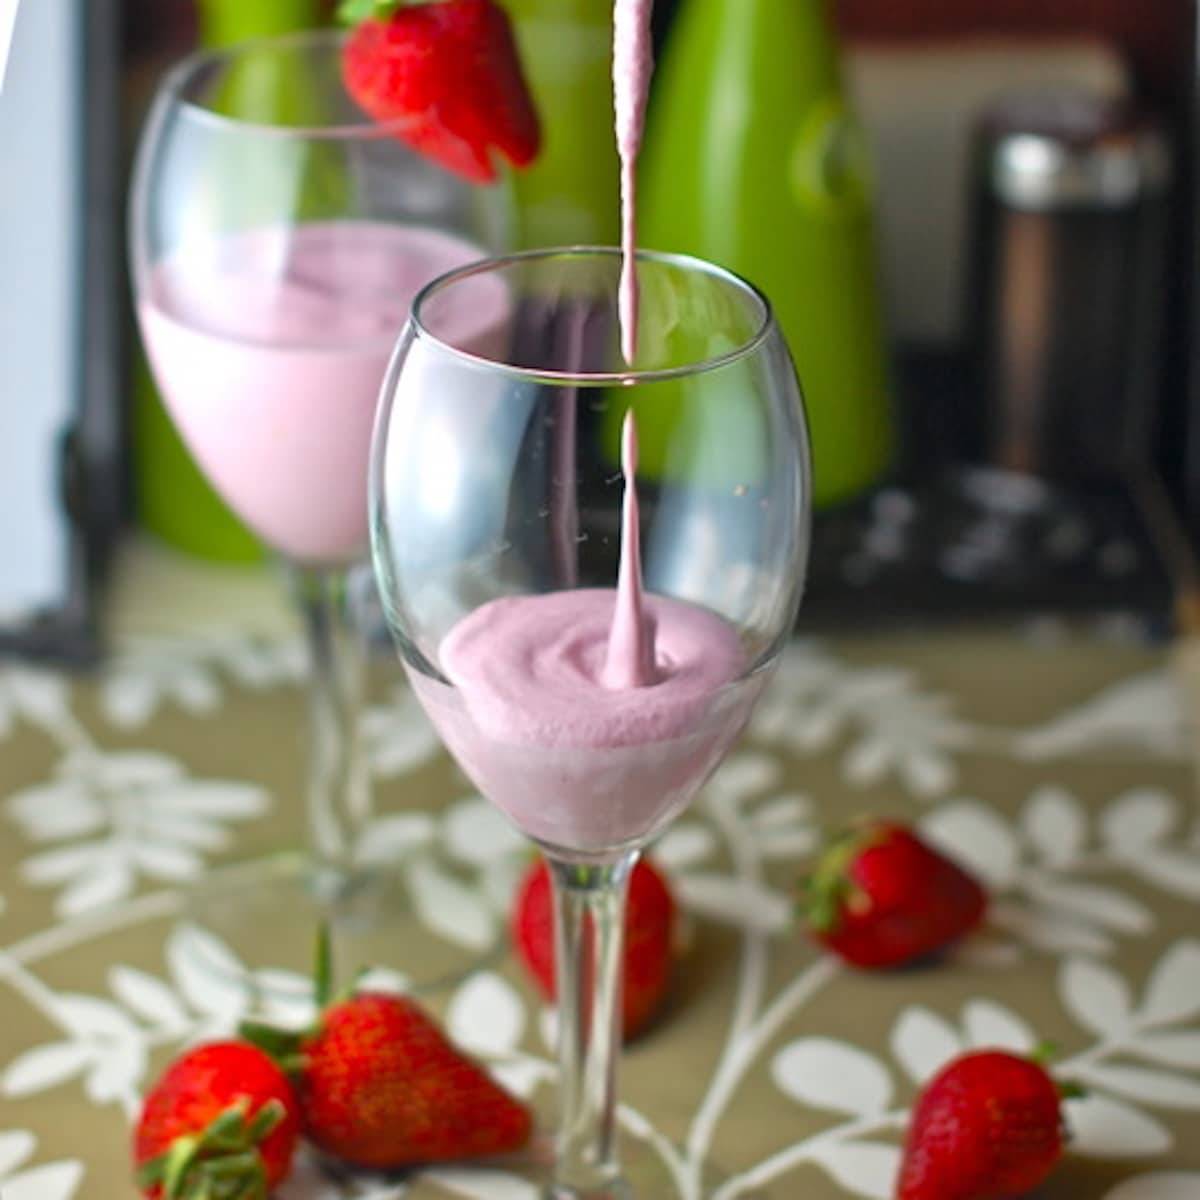 Lemon berry smoothie in a glass with strawberries.